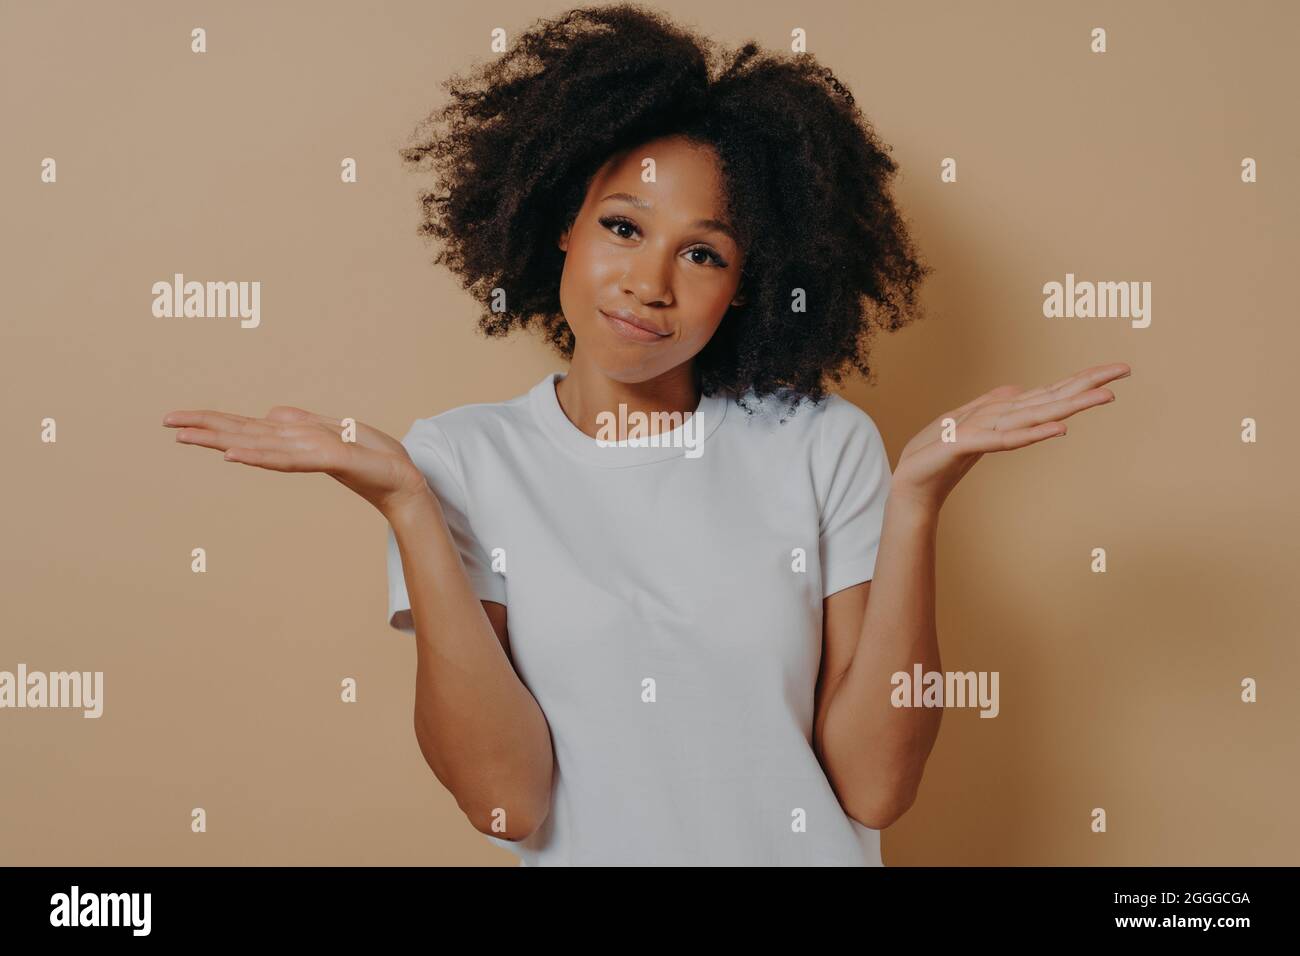 Mixed race female being unsure and having some doubts while posing against beige wall Stock Photo